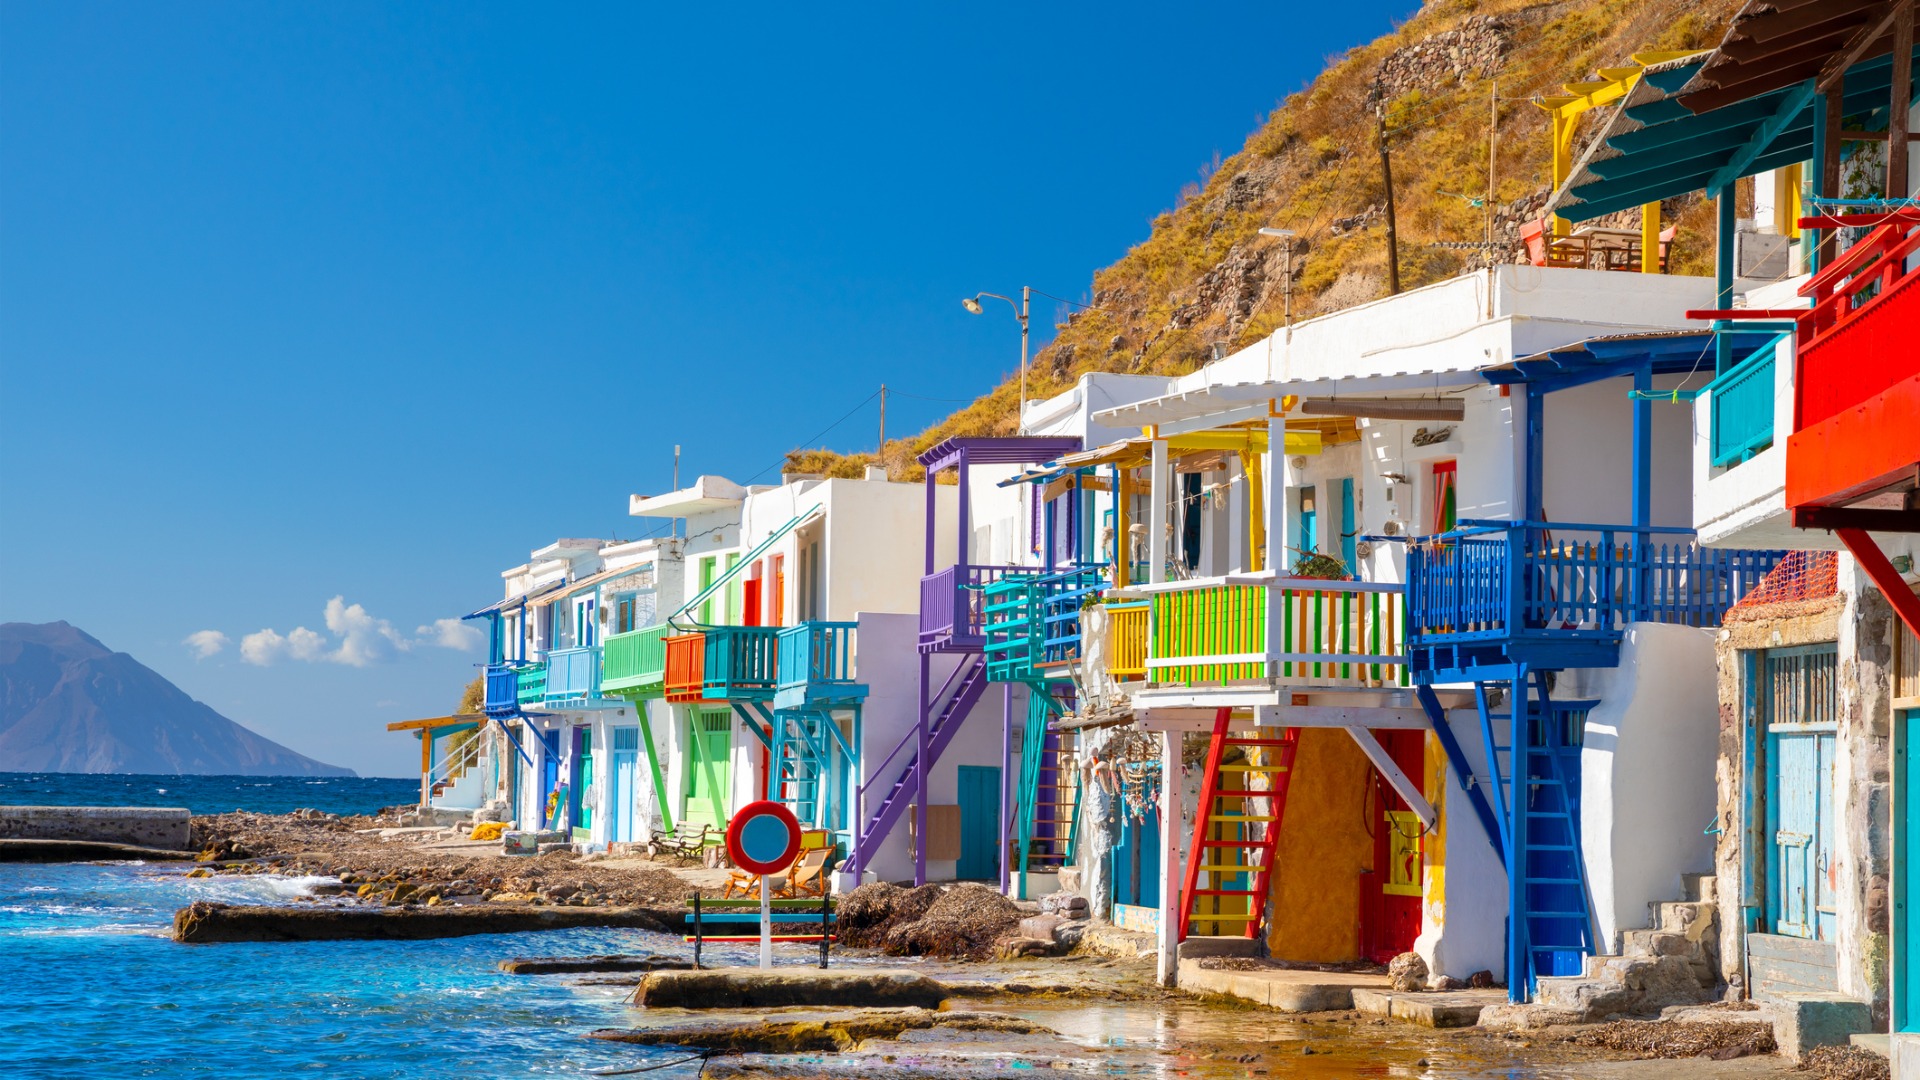 This is a photo of the distinct buildings built by the water in Klima Village. The buildings are whitewashed with colorful doors, shutters, and staircases. 